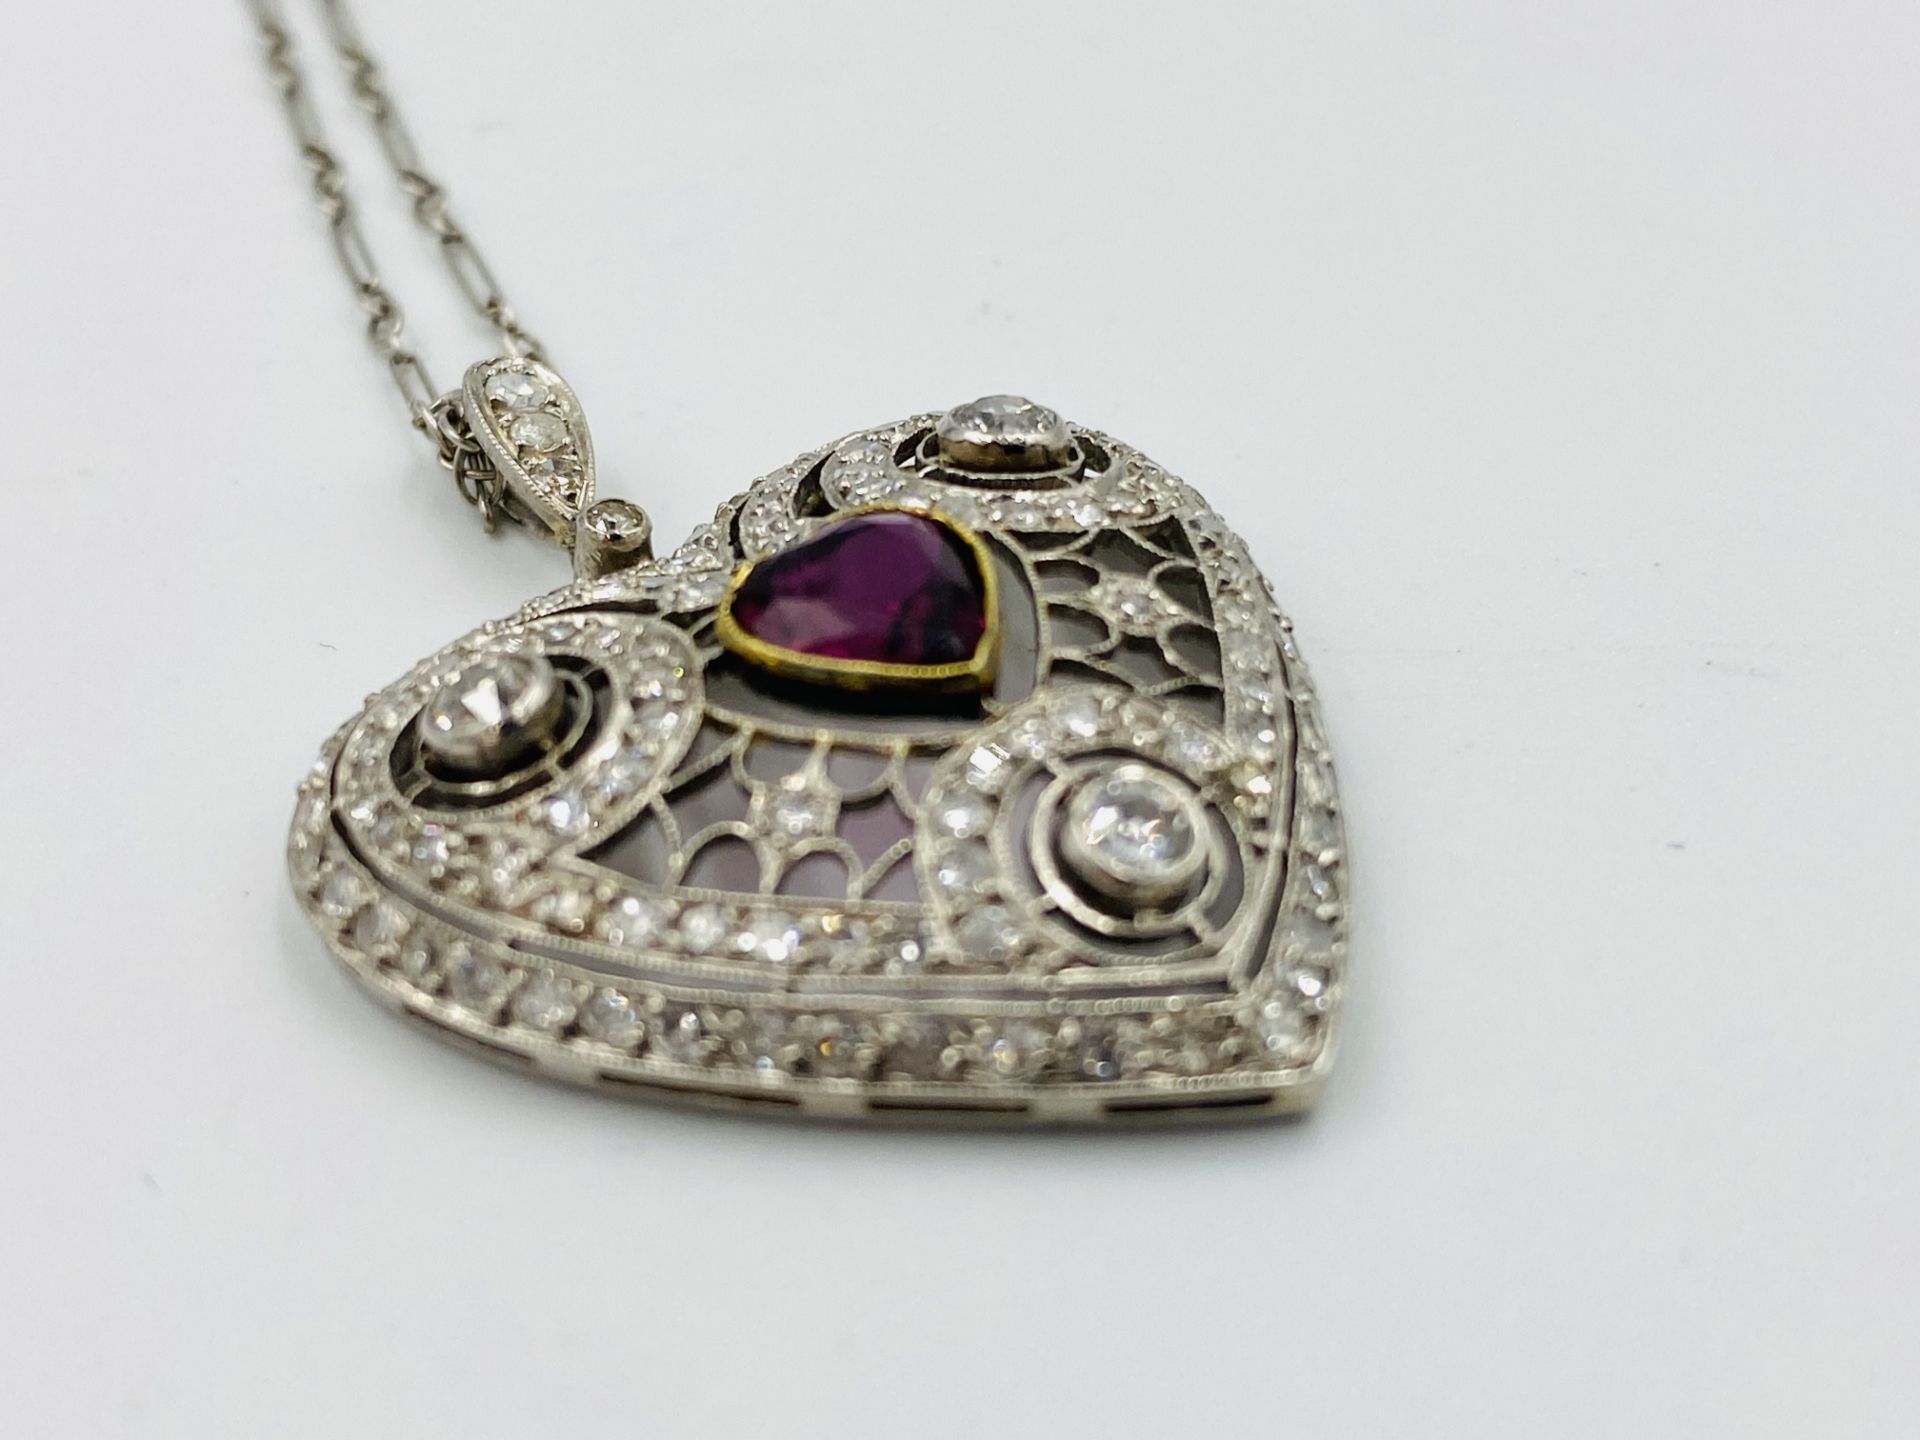 1920's ruby and diamond heart shaped pendant on chain - Image 4 of 4